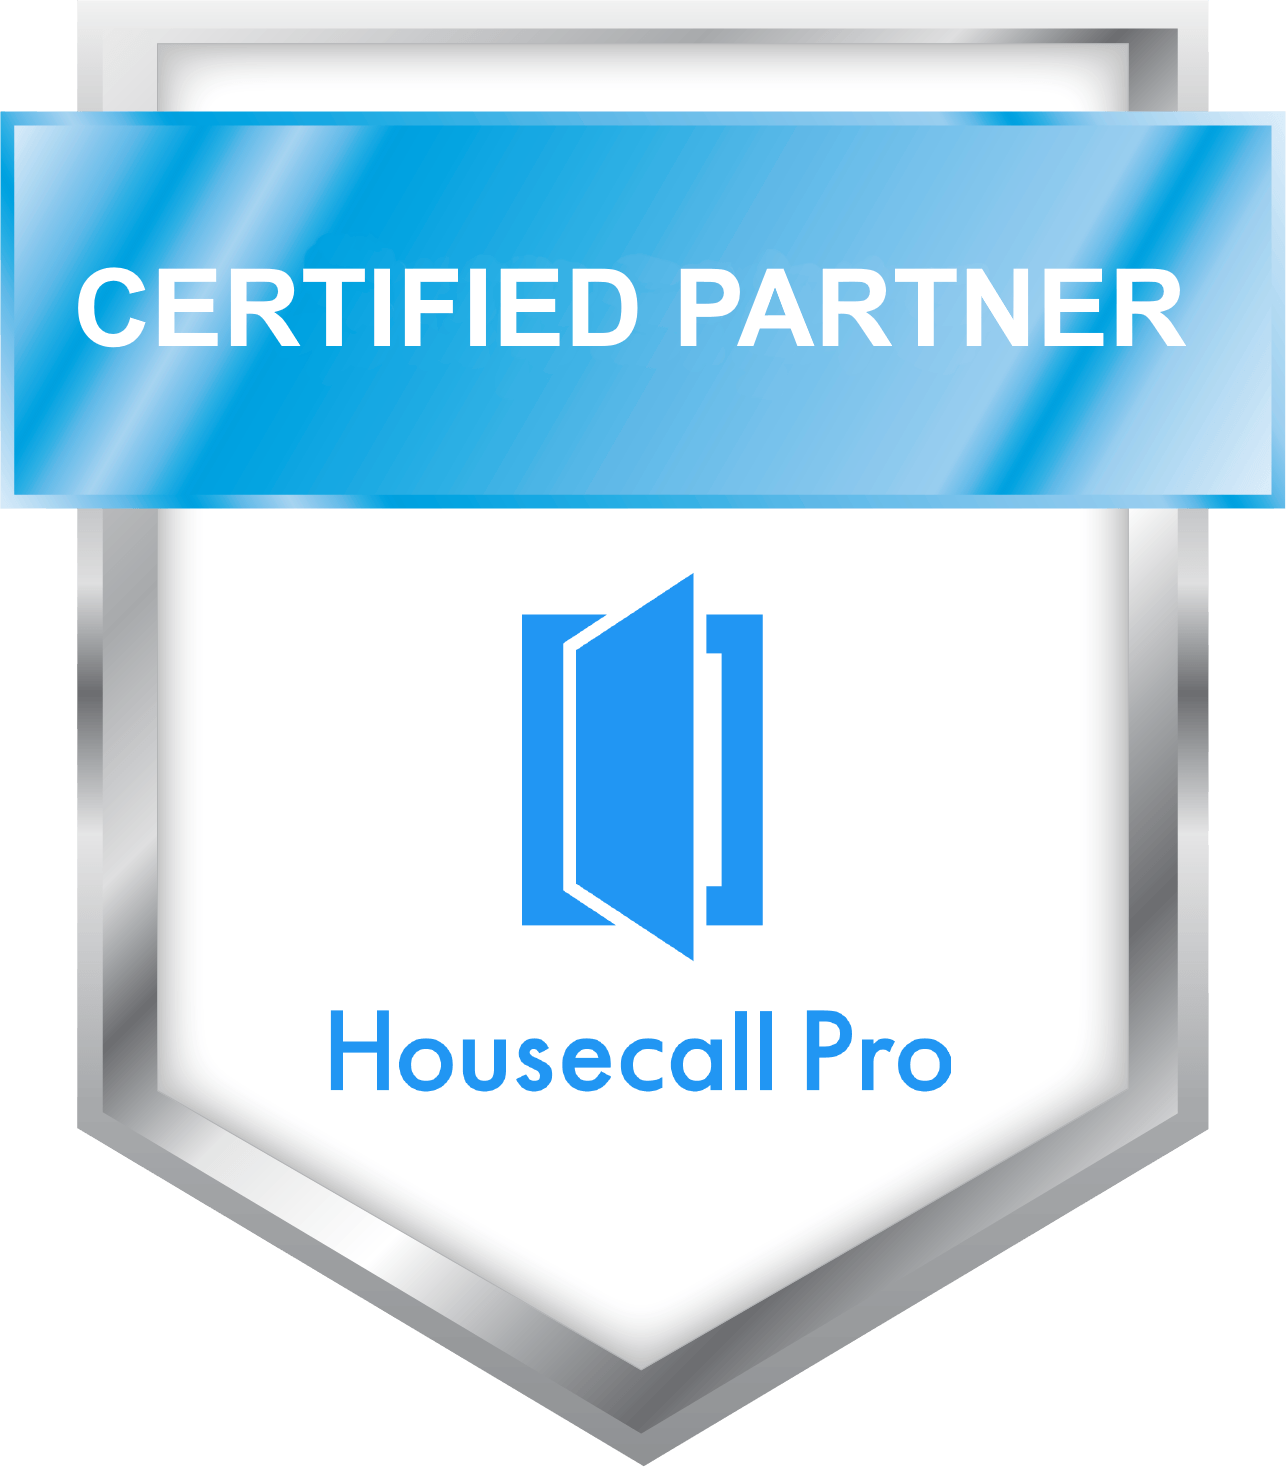 Housecall Pro certified partner